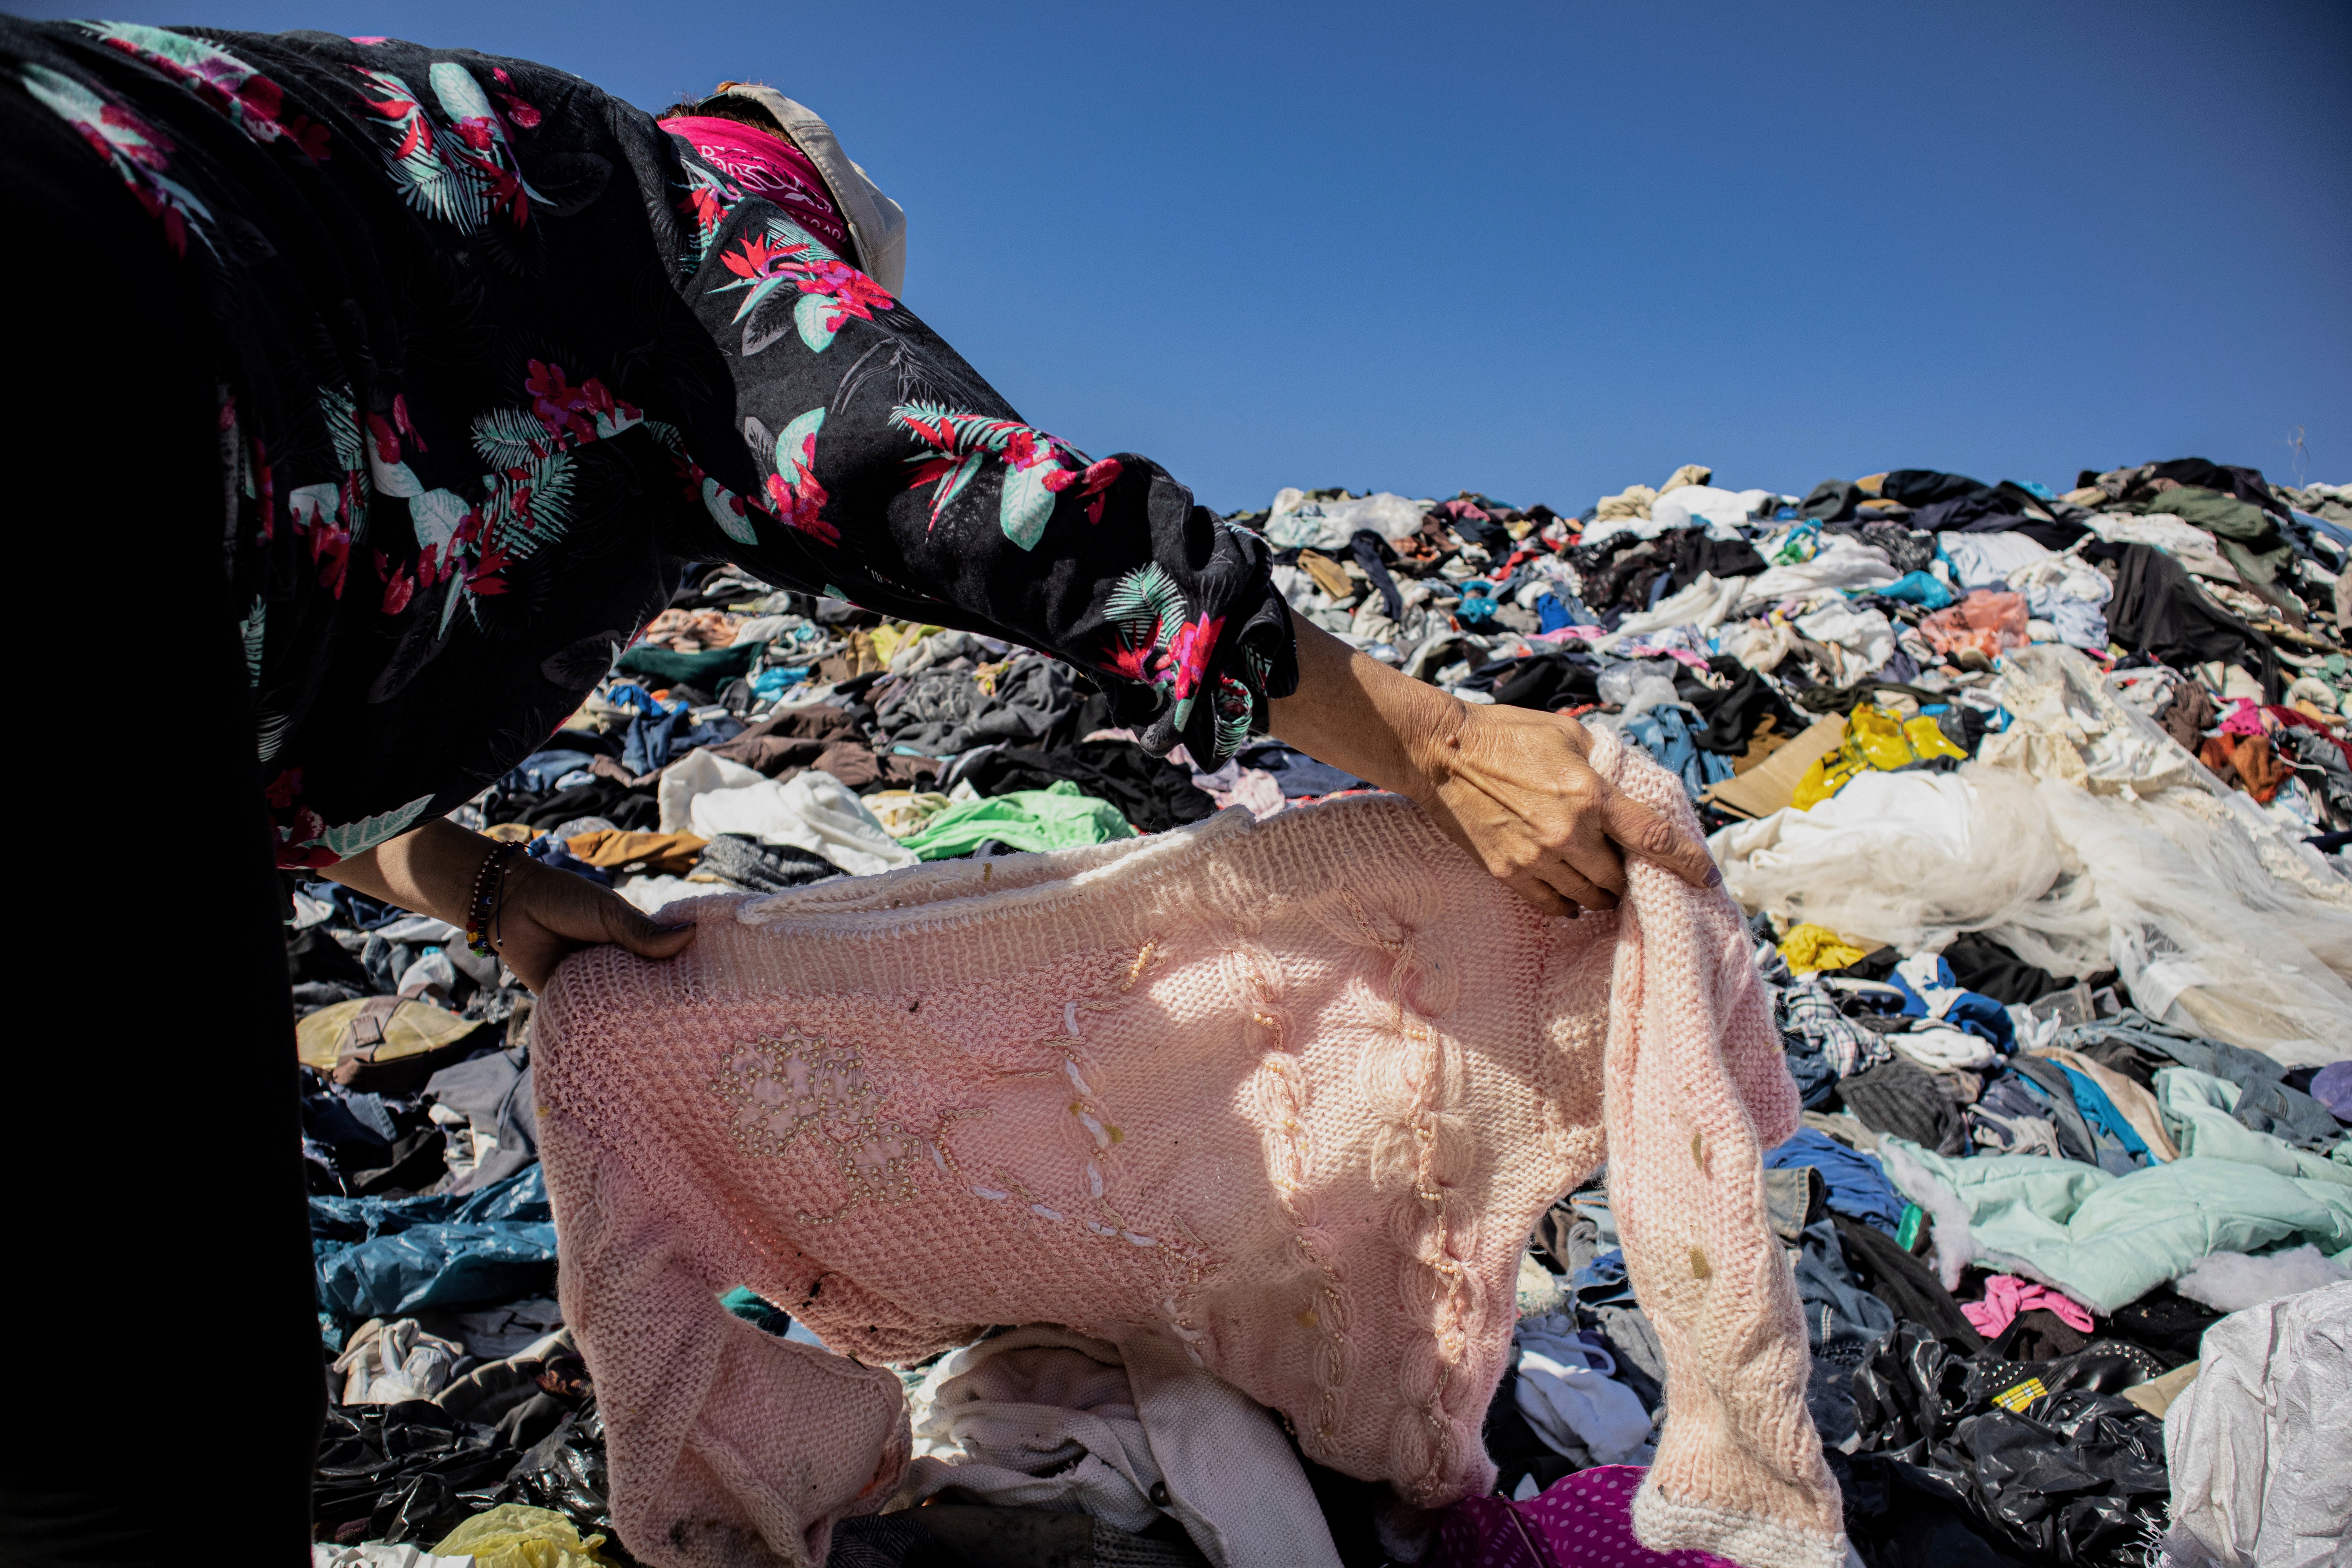 A person searches for clothing in a pile of discarded garments in the Atacama Desert. (Photo: Antonio Cossio,   (AP))